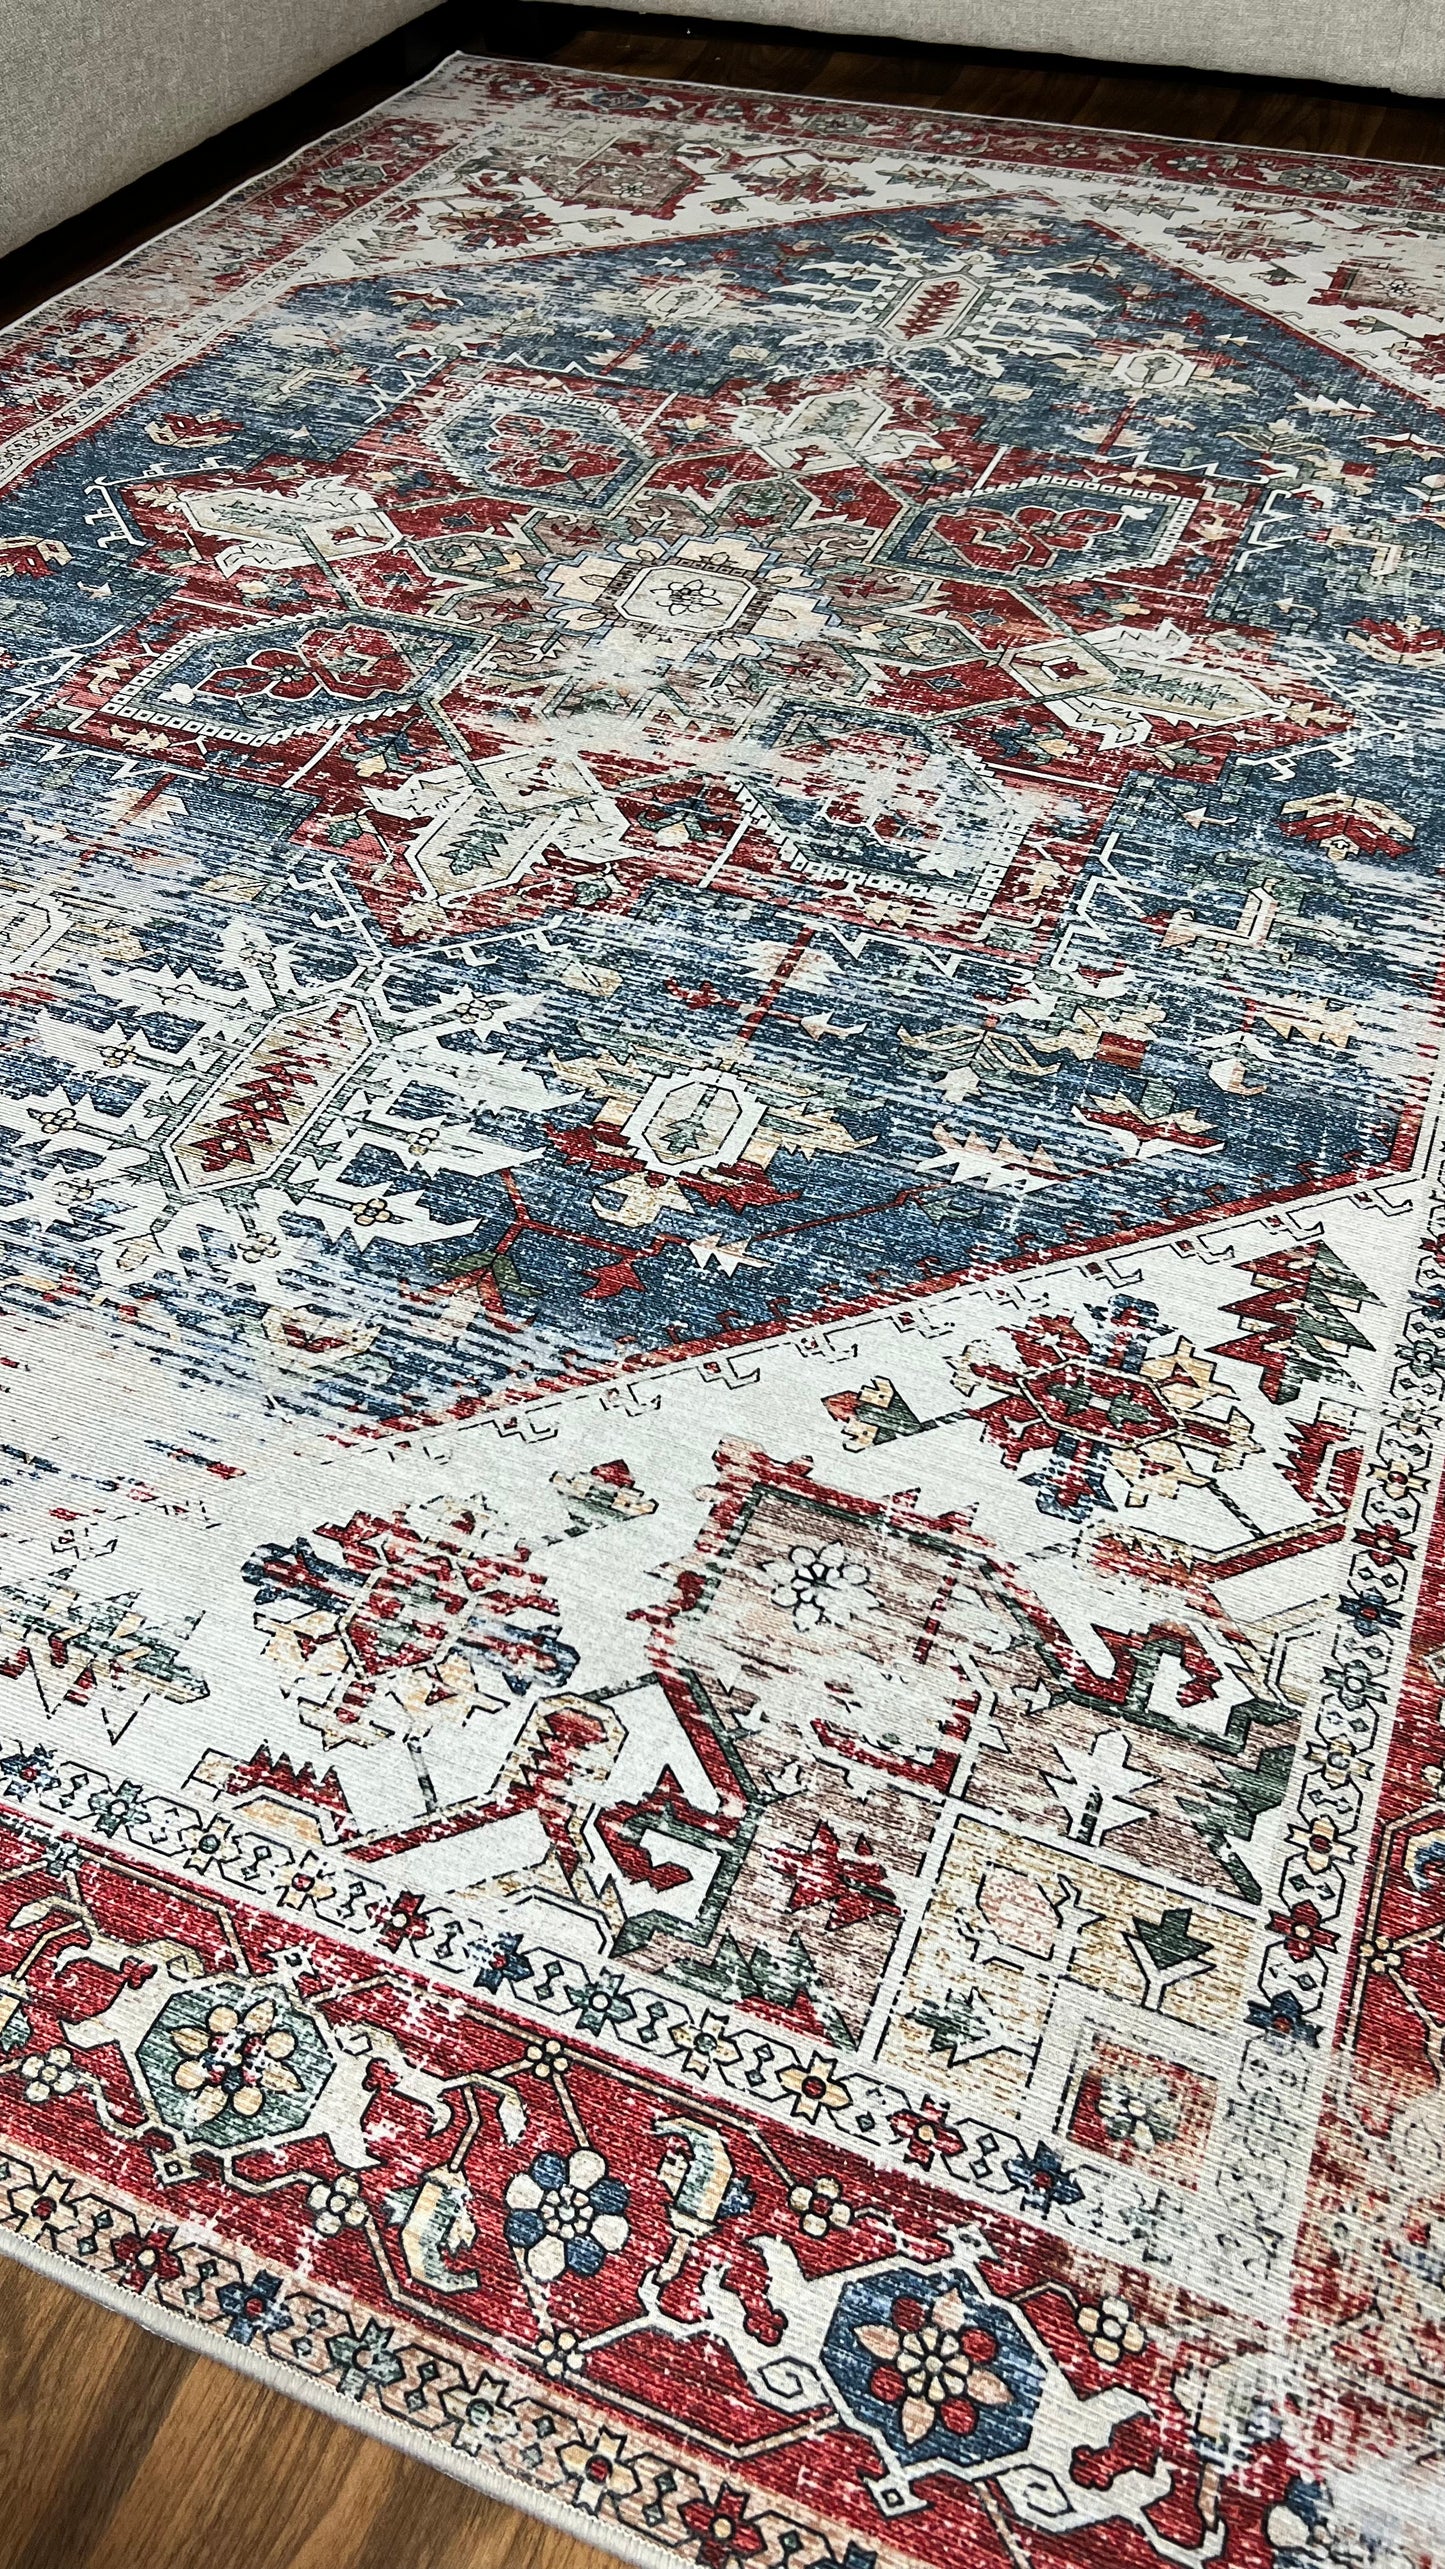 A Symphony of Style: Persian Rugs for the Modern Home